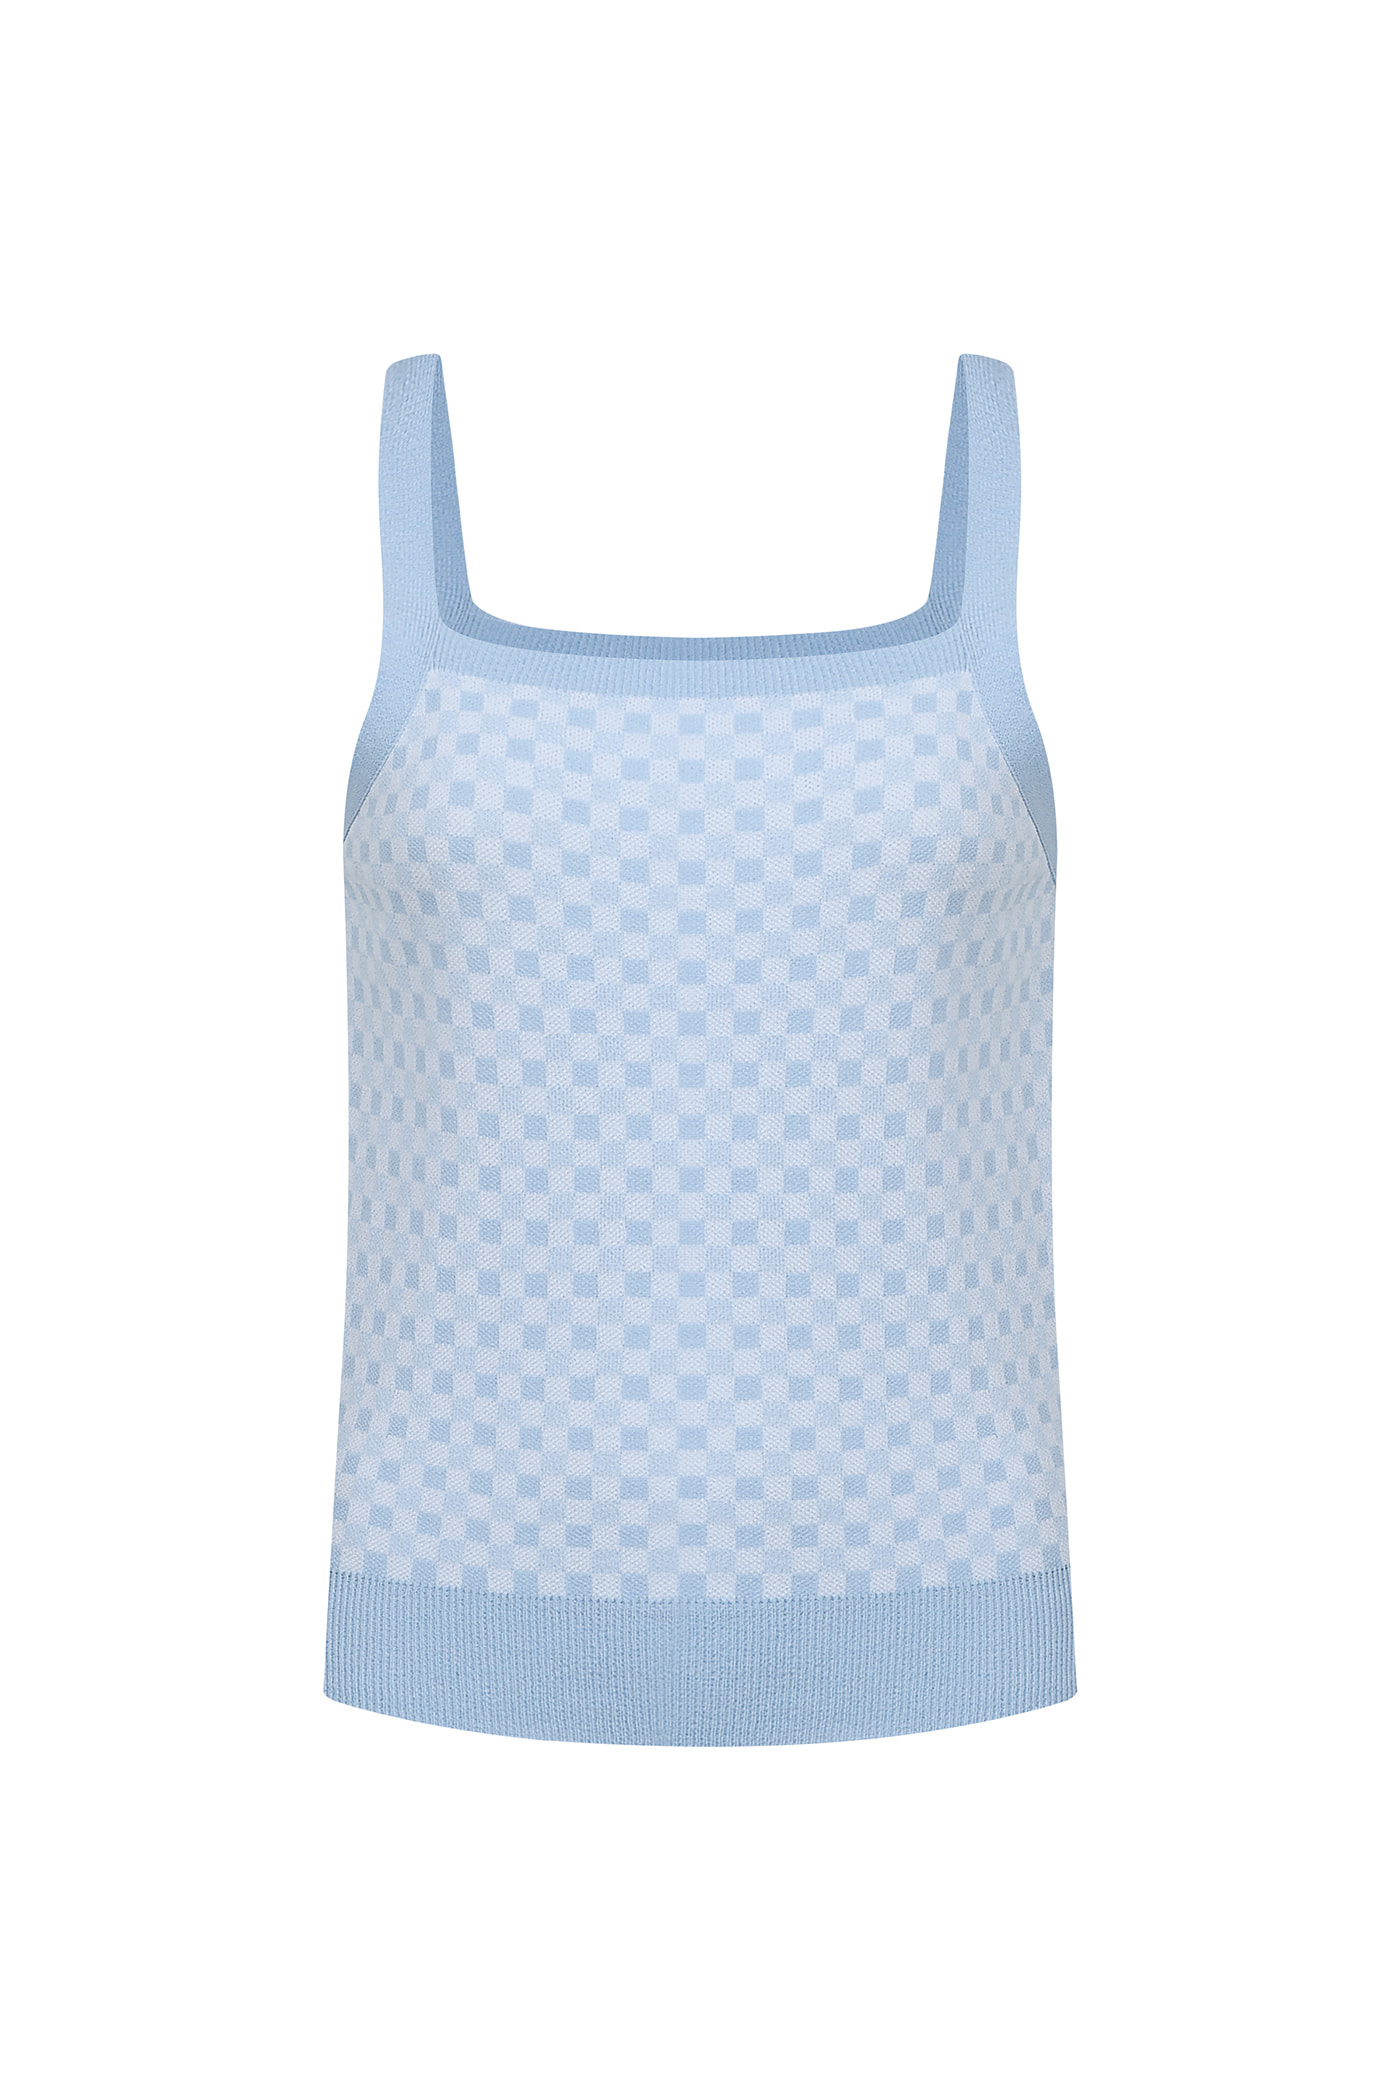 Gingham CheckSleeveless Knit Top-3color